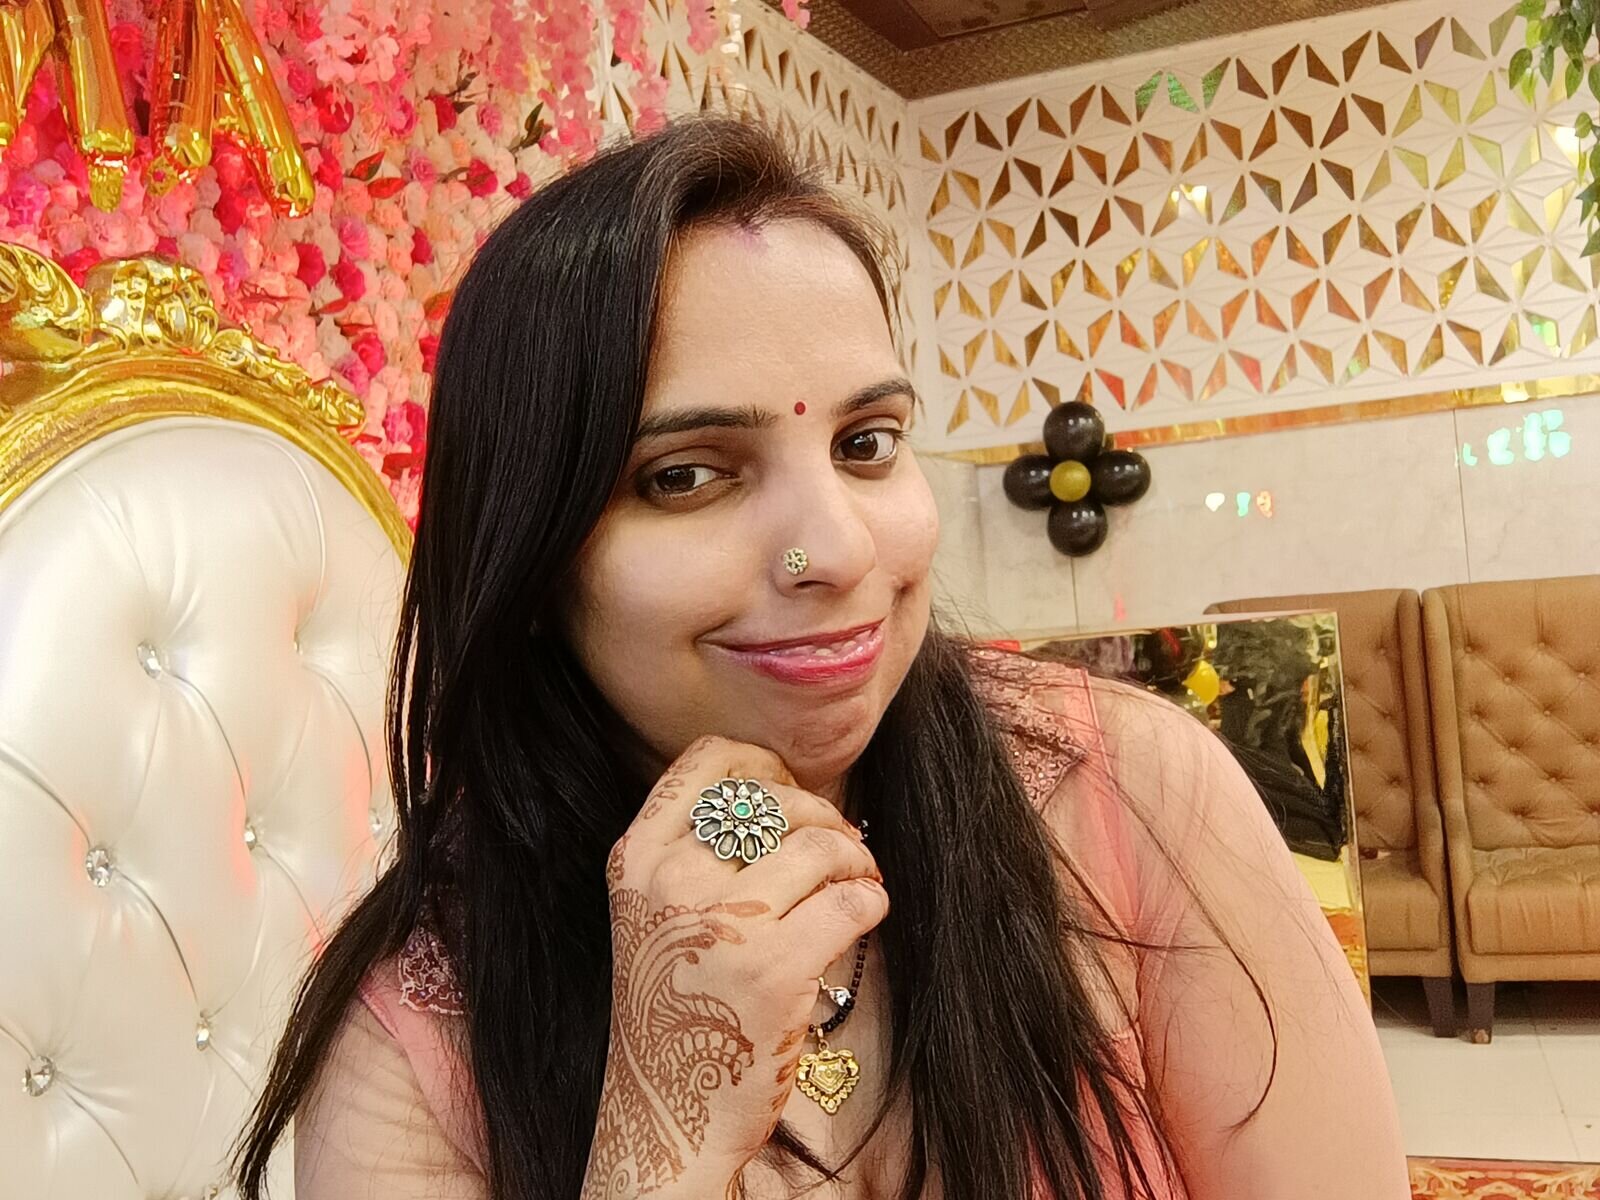 Free Live Sex Chat With DivyankaOceanfin